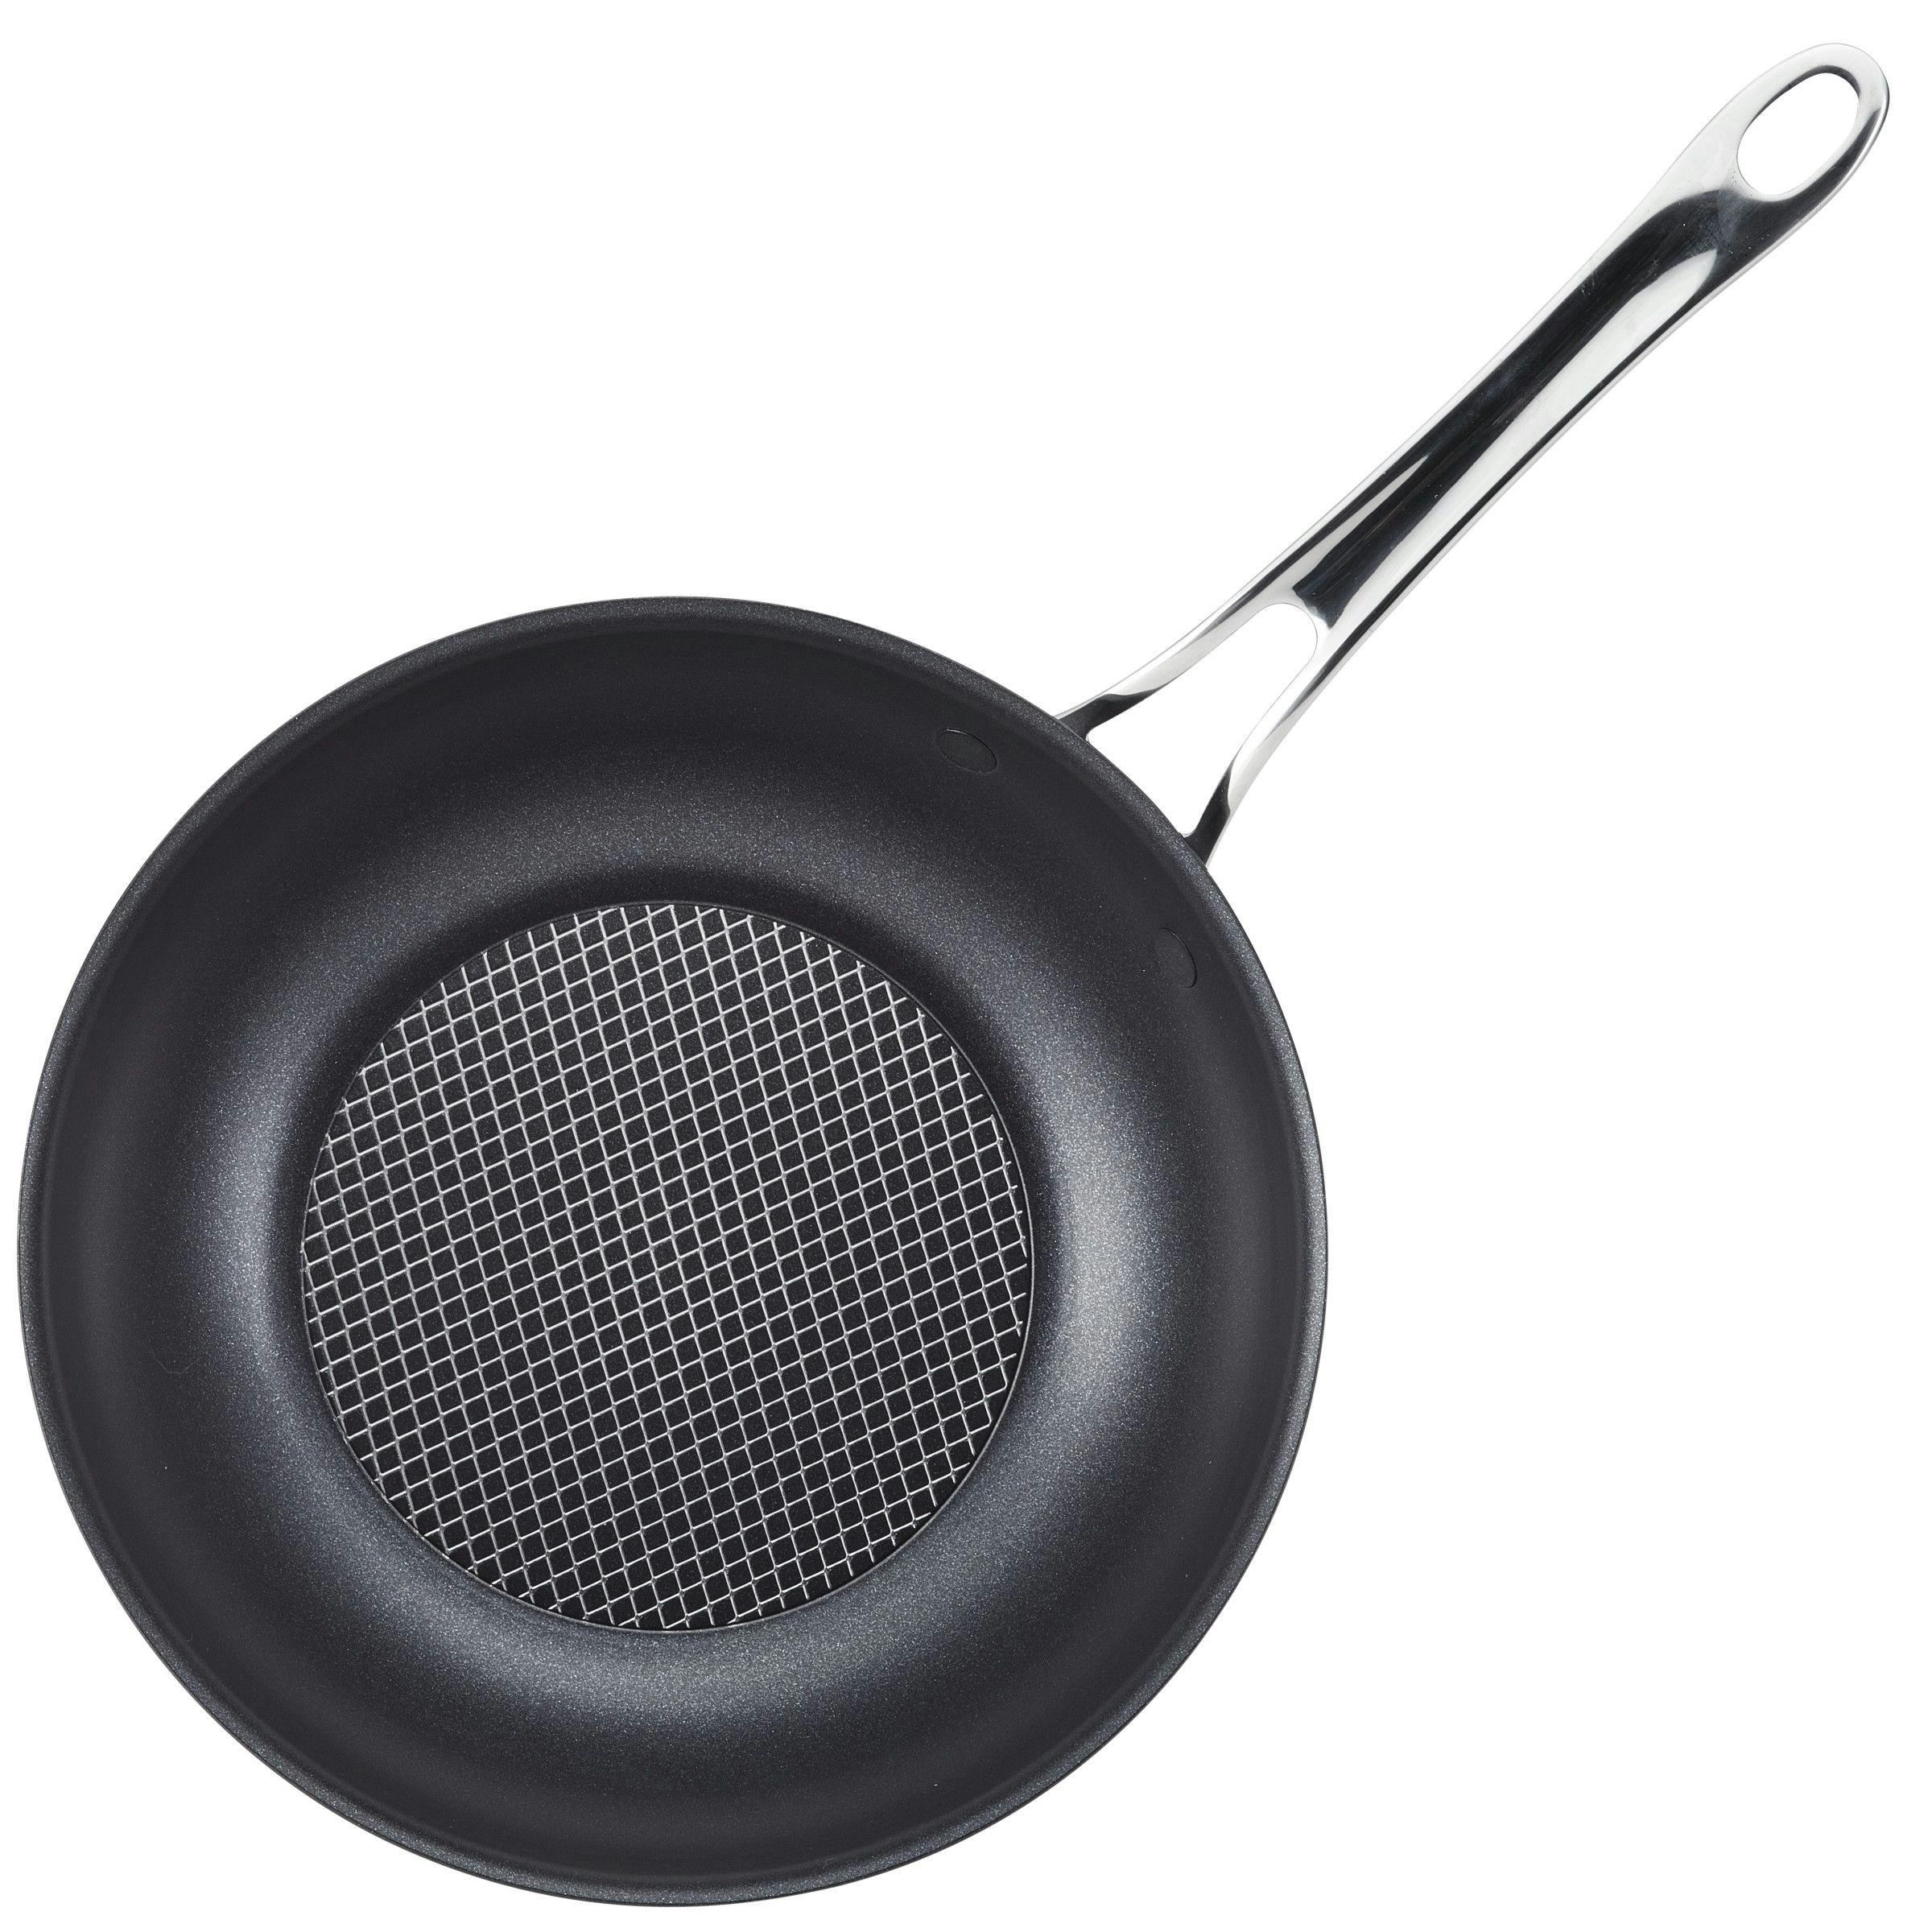 Anolon X Hybrid 10 Nonstick Induction Fry Wok with Lid Super Dark Gray